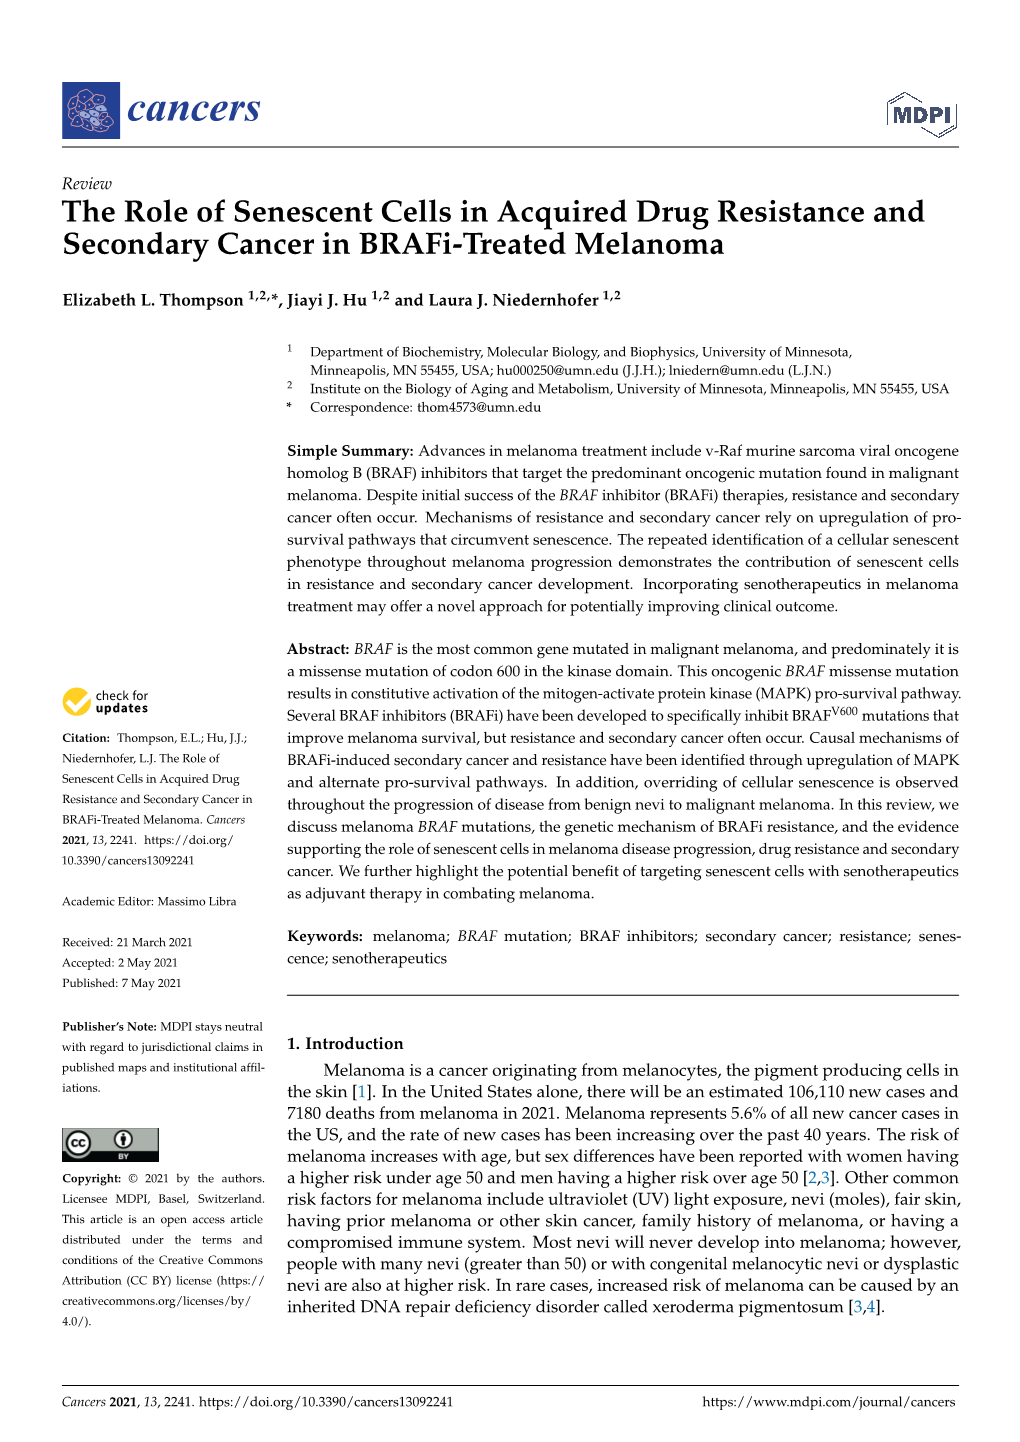 The Role of Senescent Cells in Acquired Drug Resistance and Secondary Cancer in Brafi-Treated Melanoma